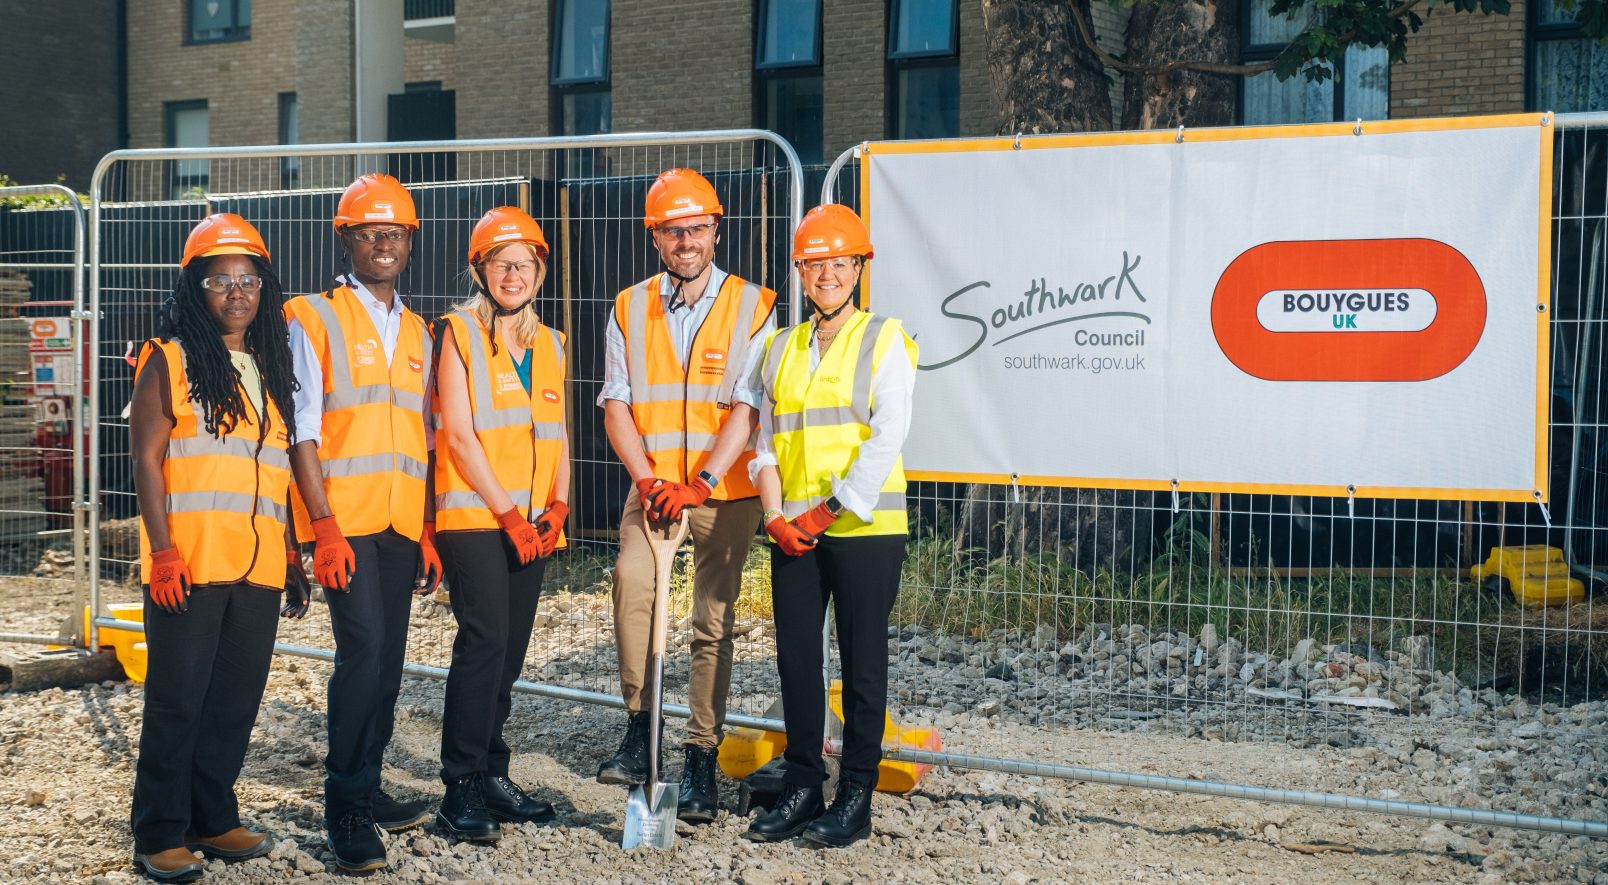 Construction Begins for Almost 700 New Homes in Southwark